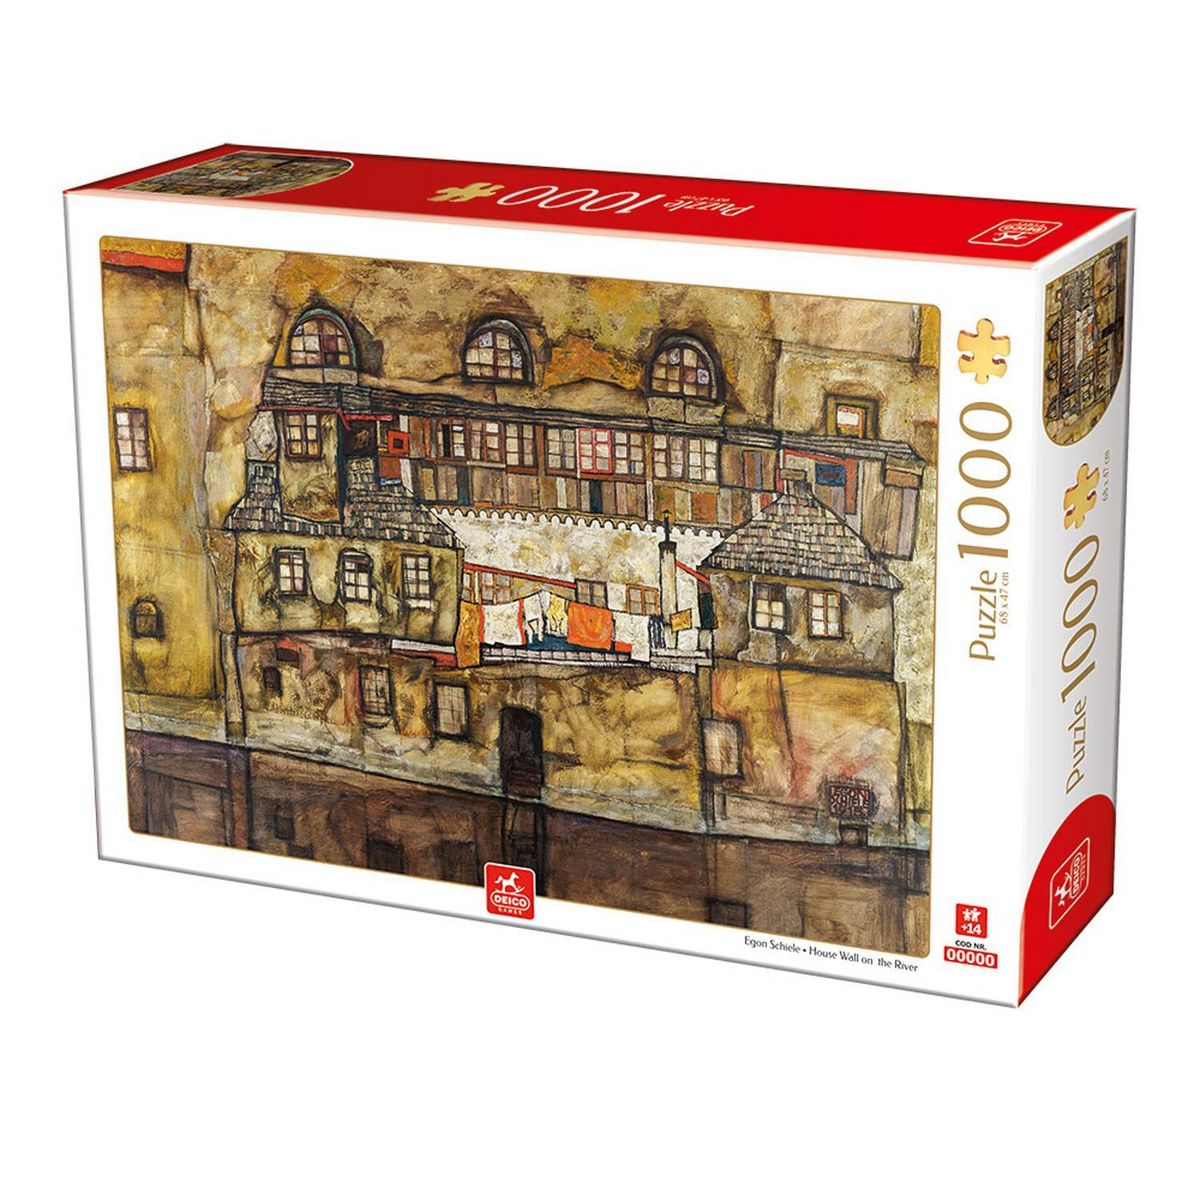 DToys Puzzle 1000 pièces : House Wall of the River, Egon Schiele